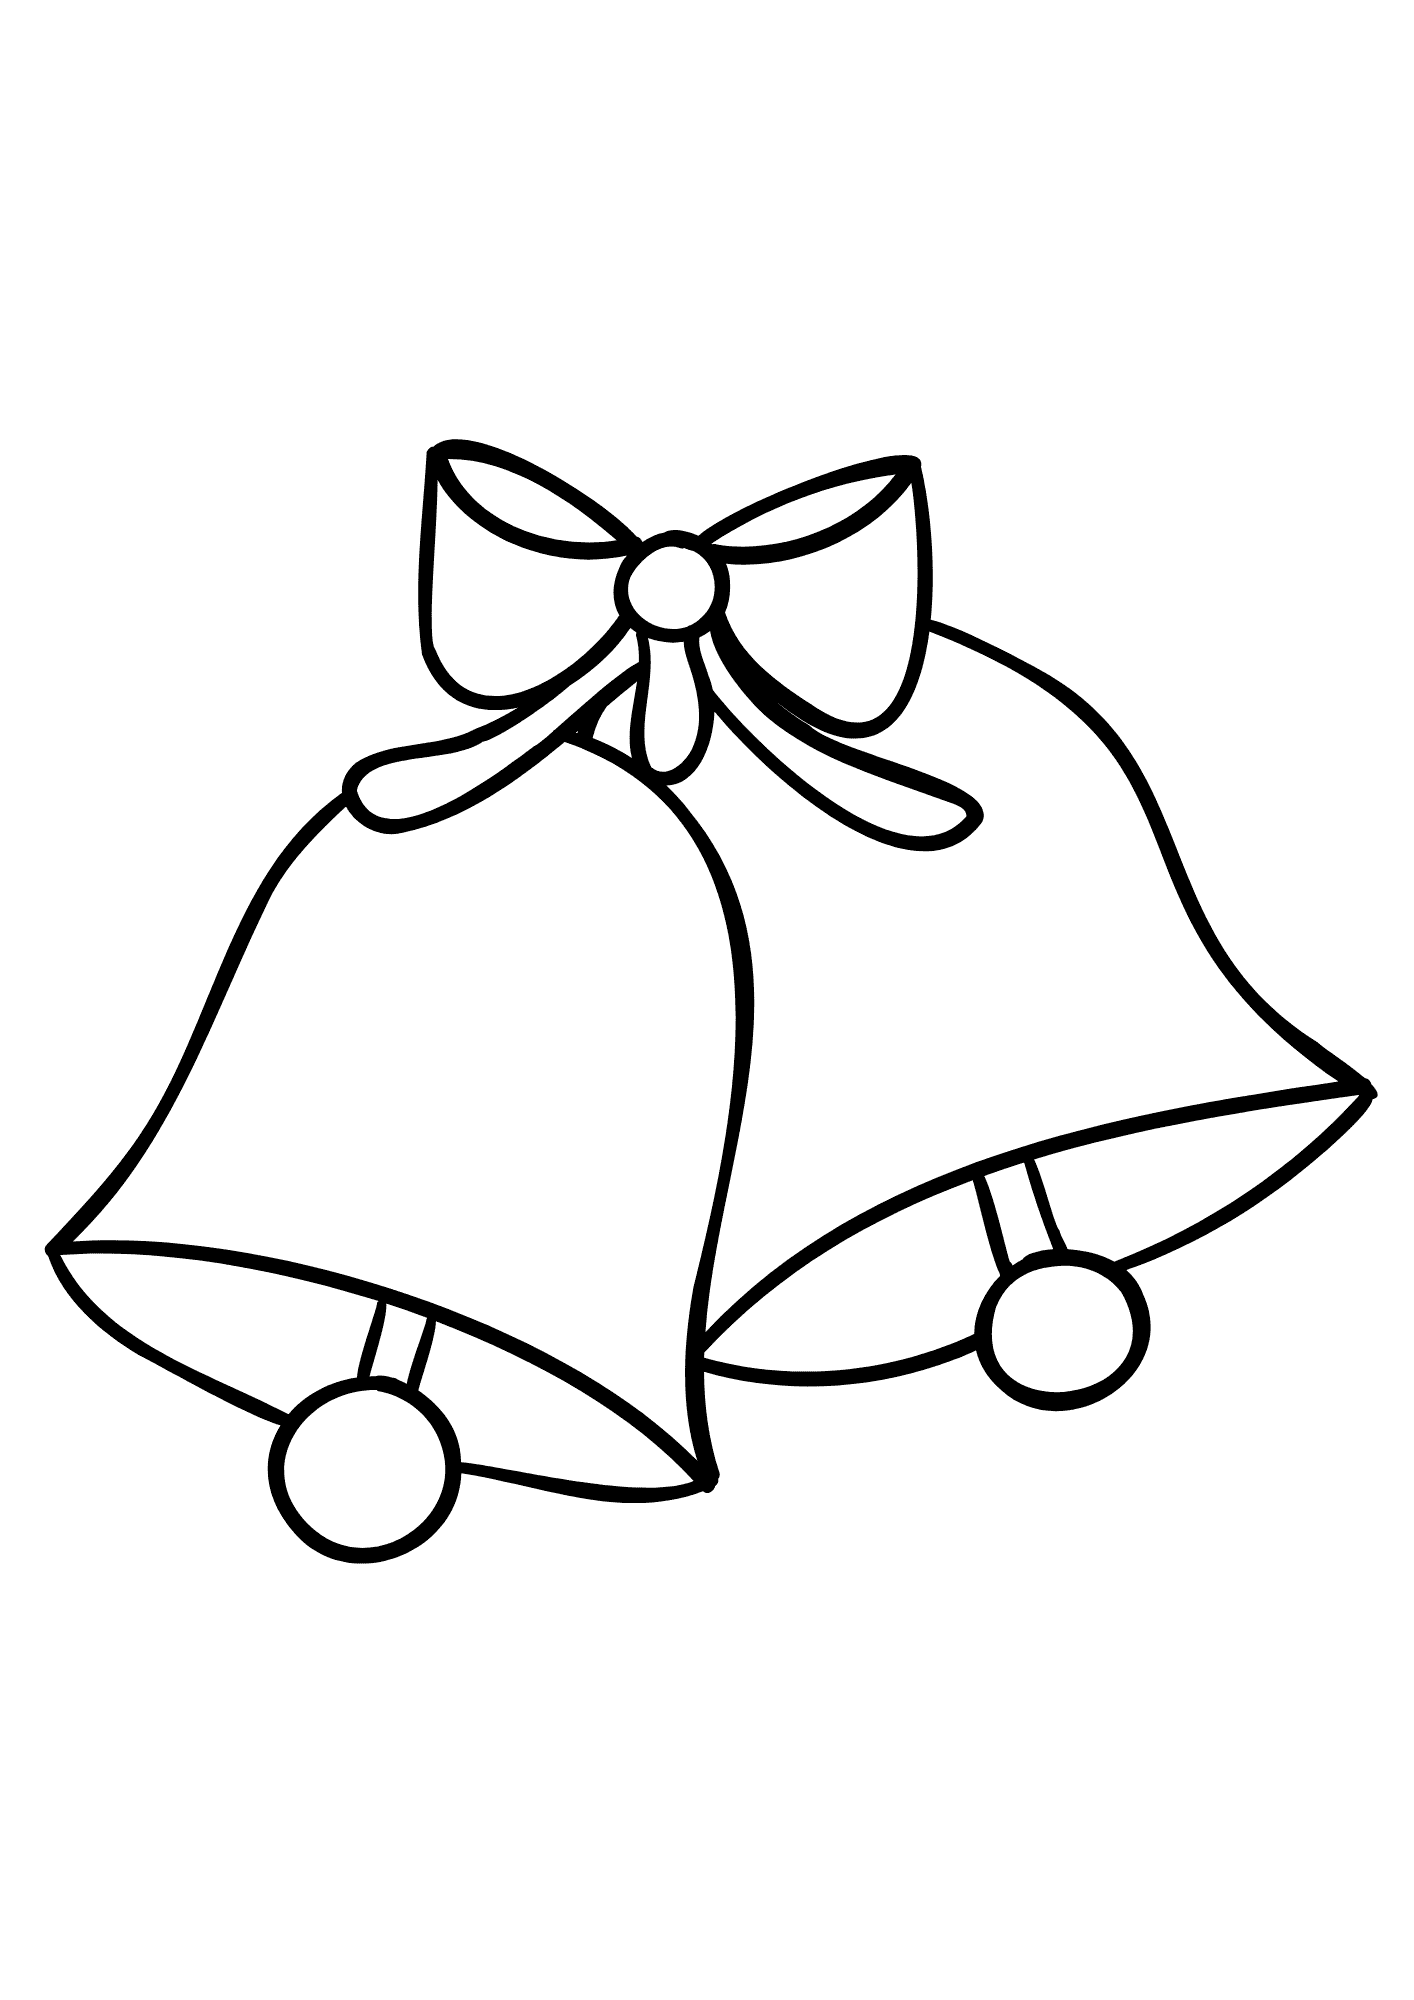 Free Coloring Pages Of Christmas Bells